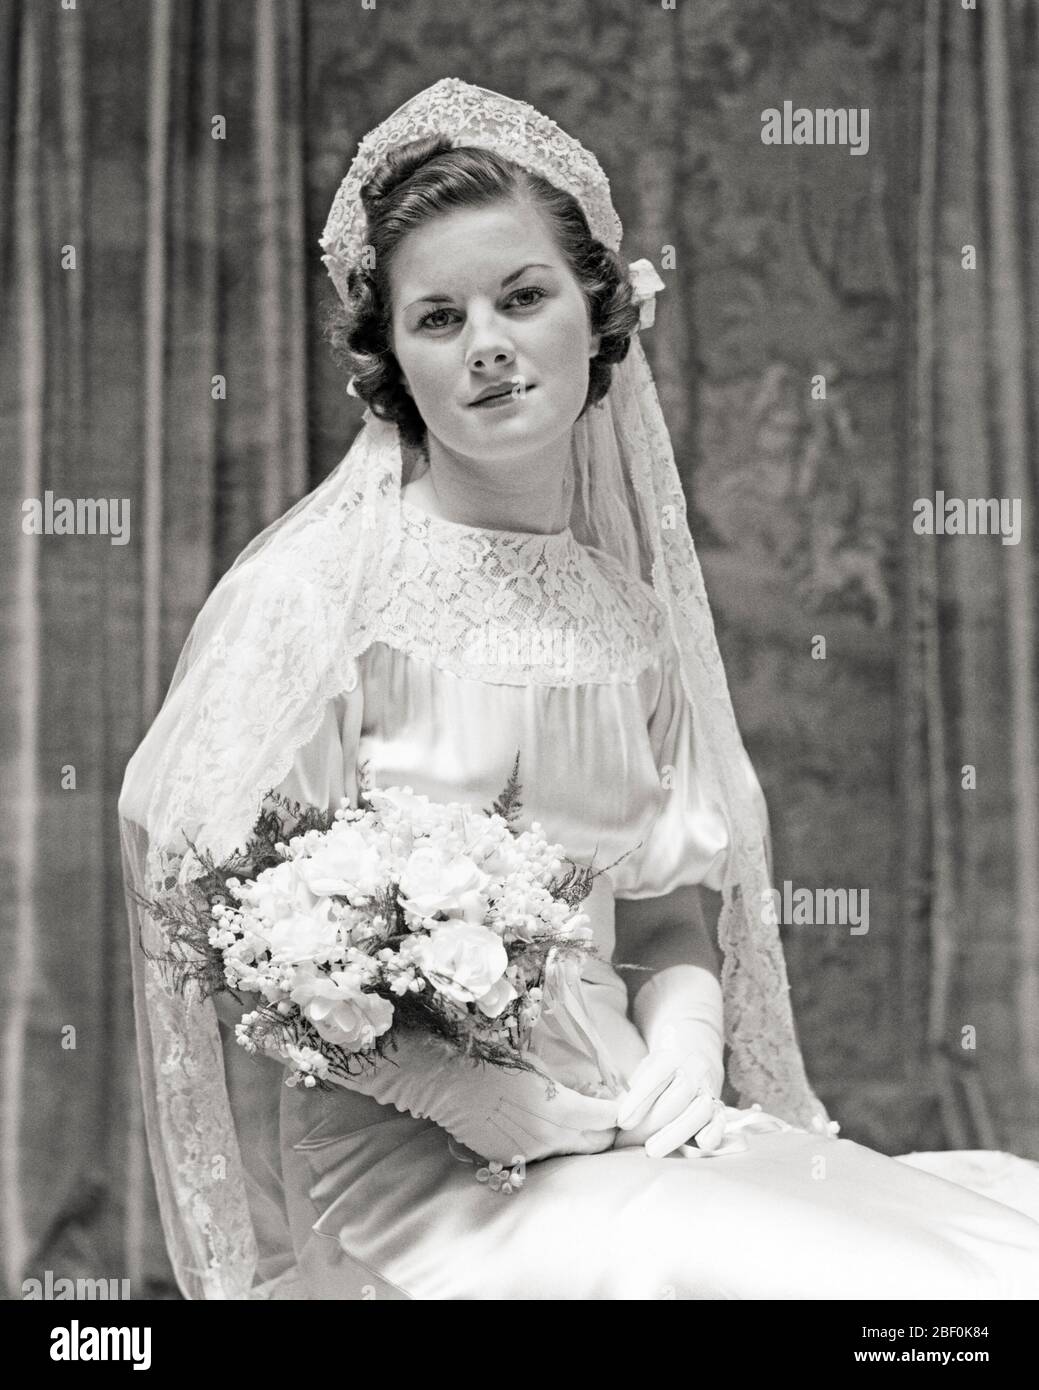 1930s PORTRAIT OF SEATED BRIDE WEARING GOWN VEIL HOLDING BOUQUET LOOKING AT CAMERA - b14929 HAR001 HARS COPY SPACE FRIENDSHIP HALF-LENGTH LADIES MARRIAGE PERSONS INSPIRATION SATIN VEIL CEREMONY B&W BRIDAL EYE CONTACT BRUNETTE HAPPINESS BRIDES CUSTOM EXCITEMENT TRADITION NUPTIAL NUPTIALS OCCASION MARRYING PRIDE WHITE  CONCEPTUAL HEADPIECE LILY OF THE VALLEY RITE OF PASSAGE STYLISH WED MARRY MATRIMONY YOUNG ADULT WOMAN BLACK AND WHITE CAUCASIAN ETHNICITY HAR001 OLD FASHIONED Stock Photo